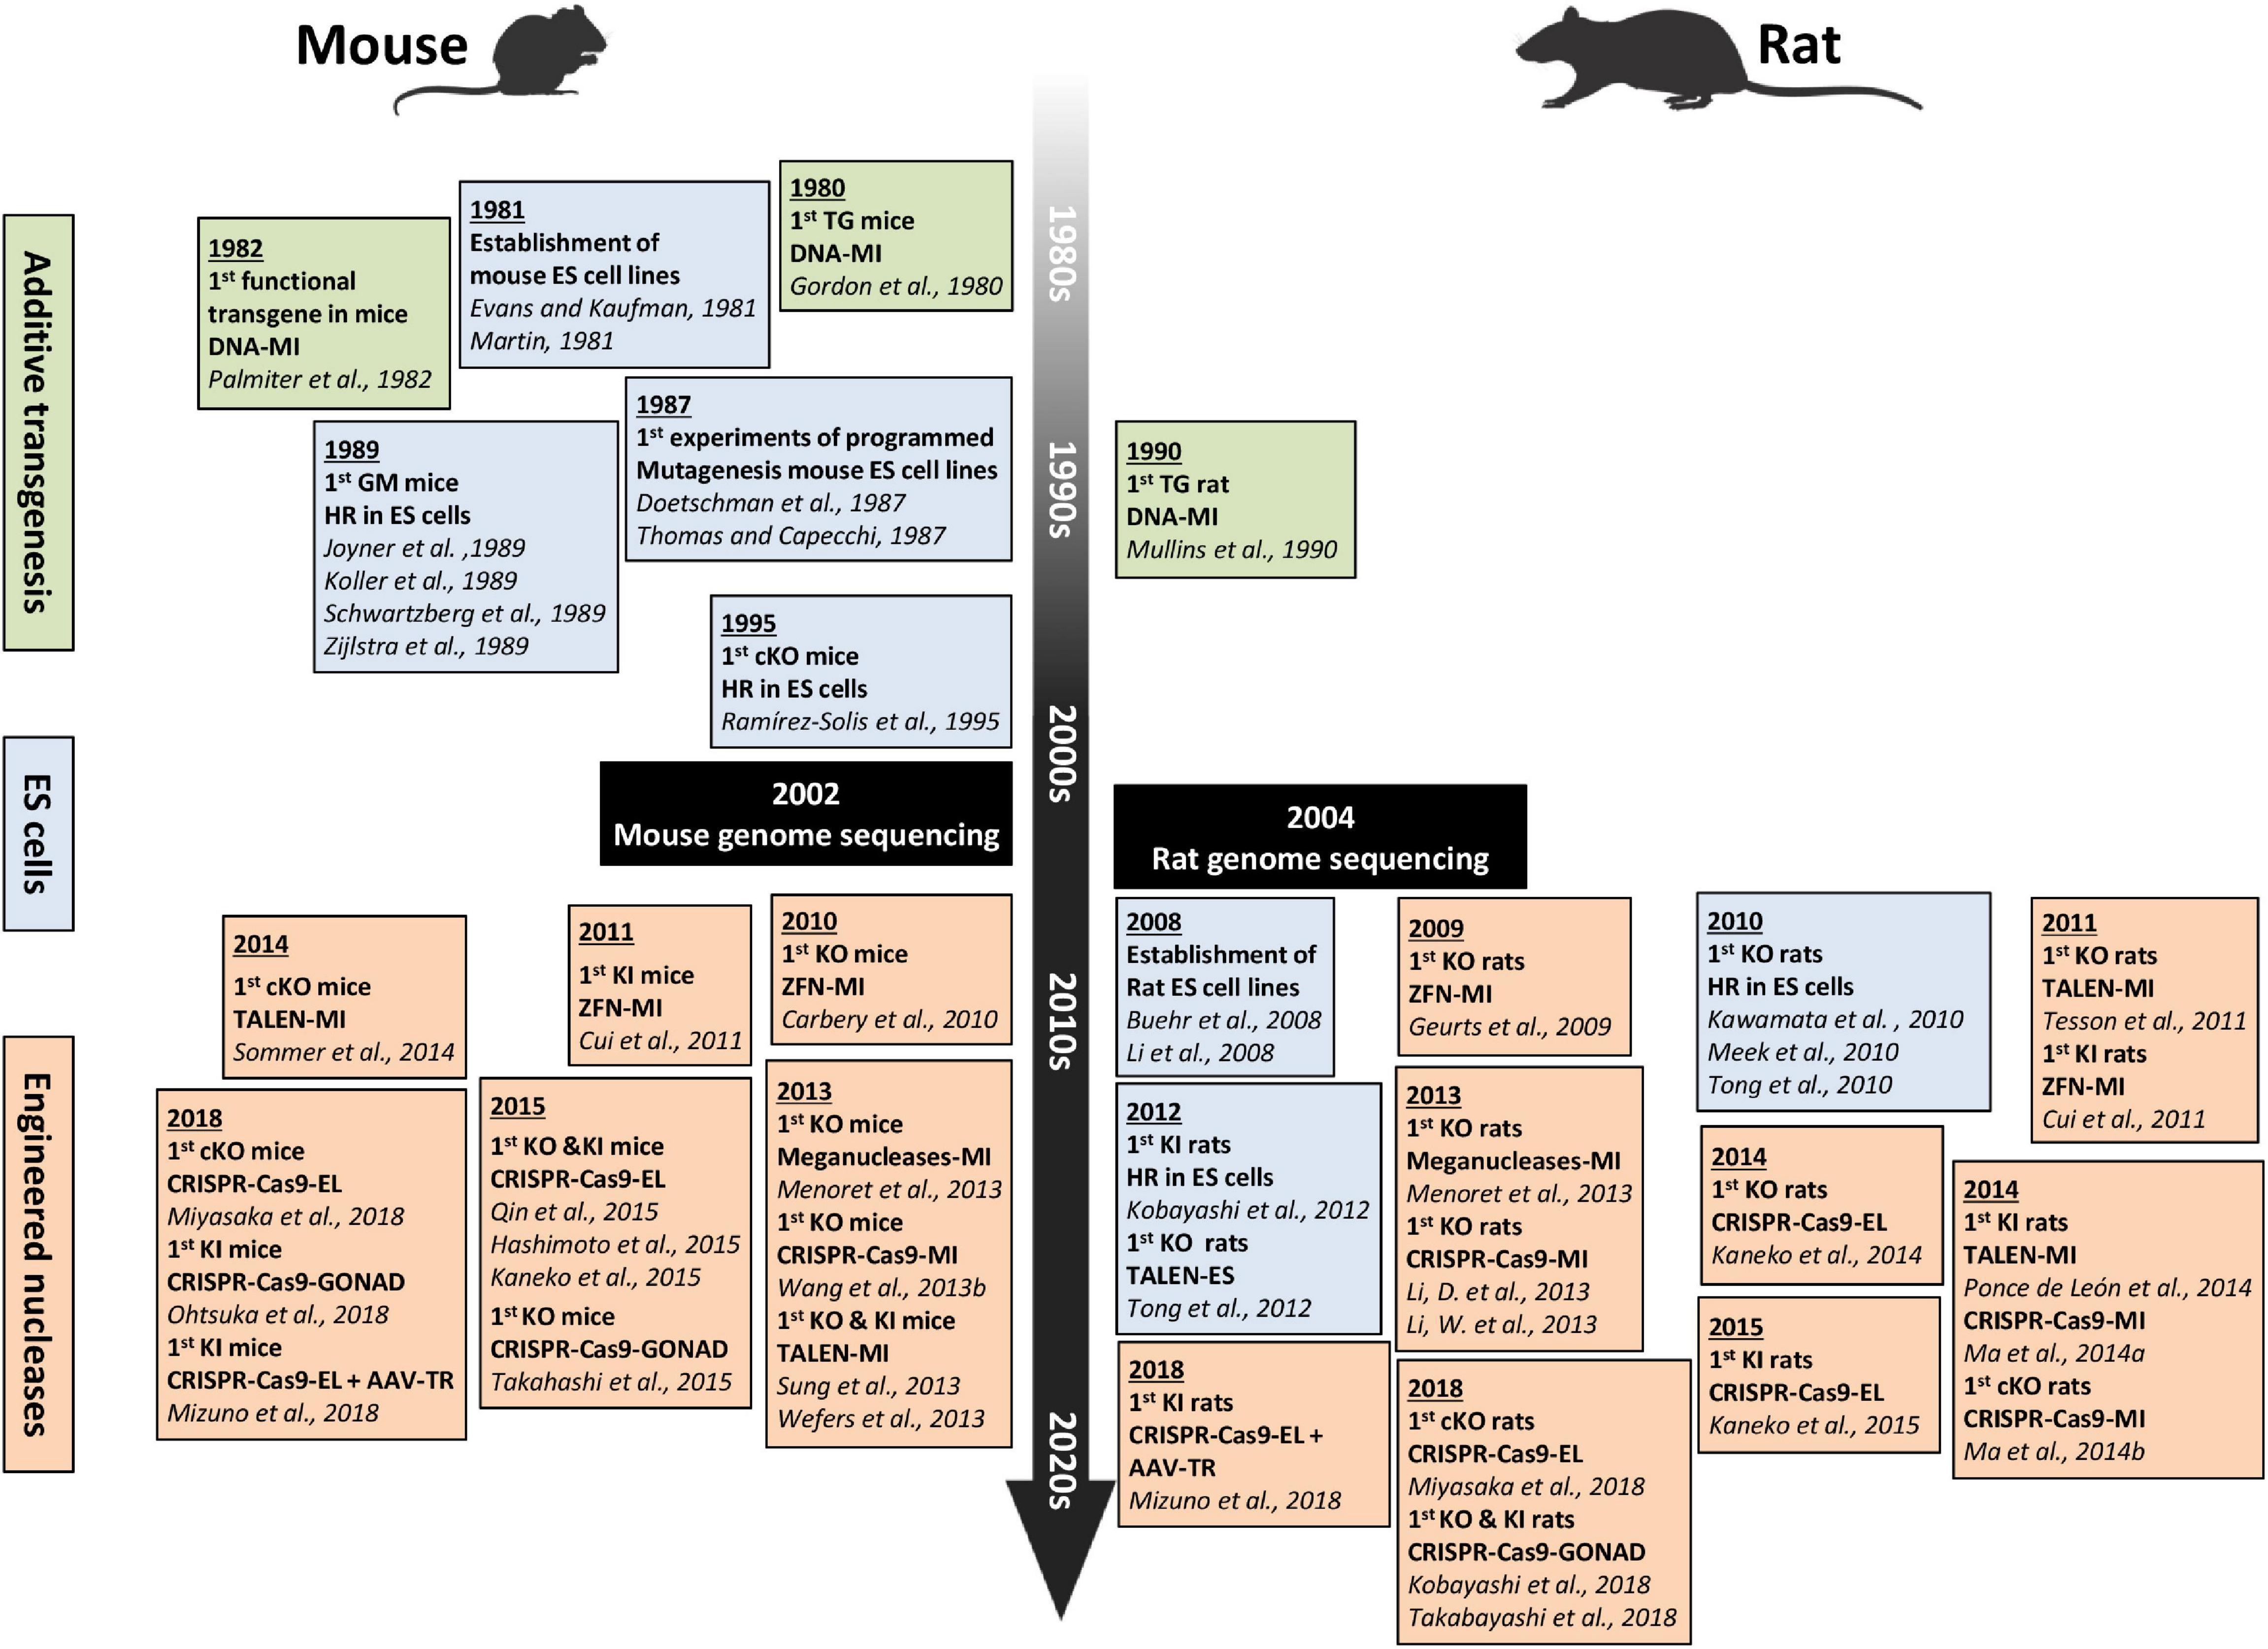 Frontiers Advances in Genome Editing and Application to the Generation of Genetically Modified Rat Models pic photo